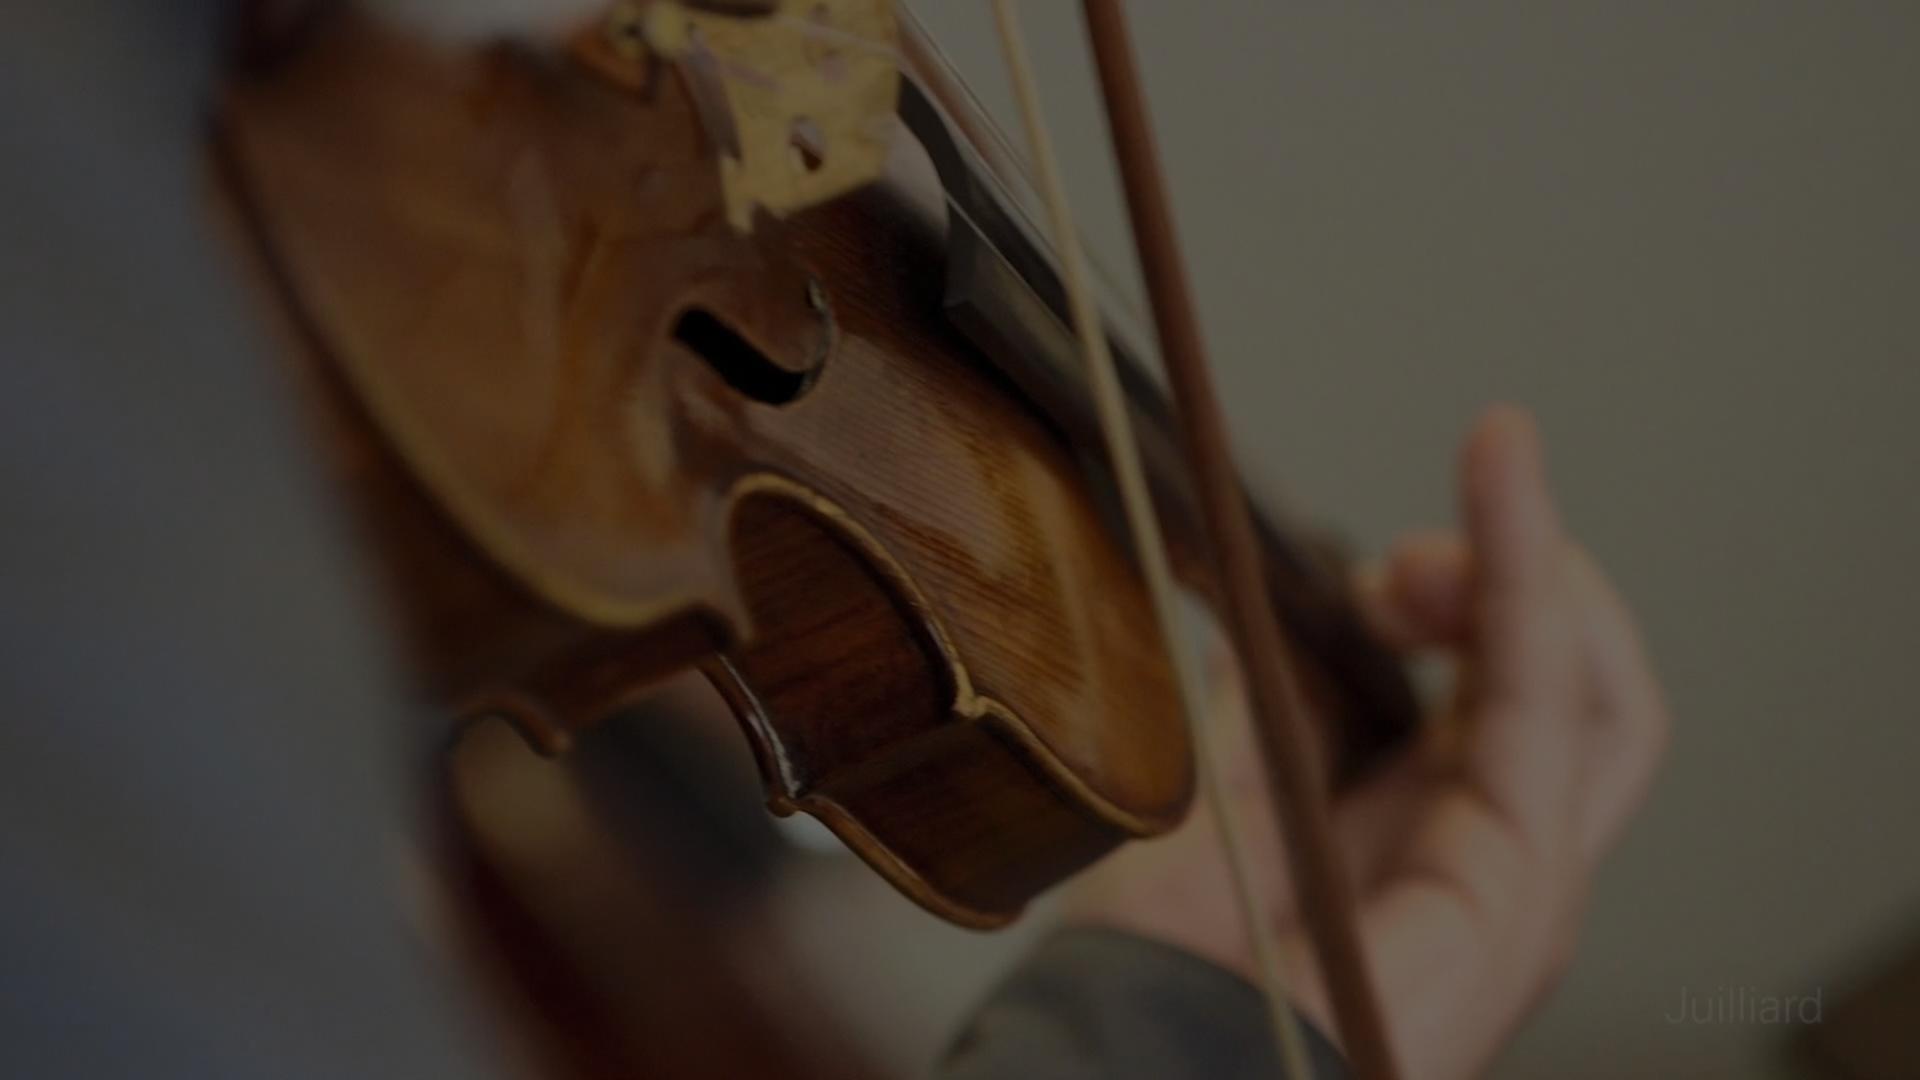 Video feature about the Juilliard String Quartet on their 70th anniversary